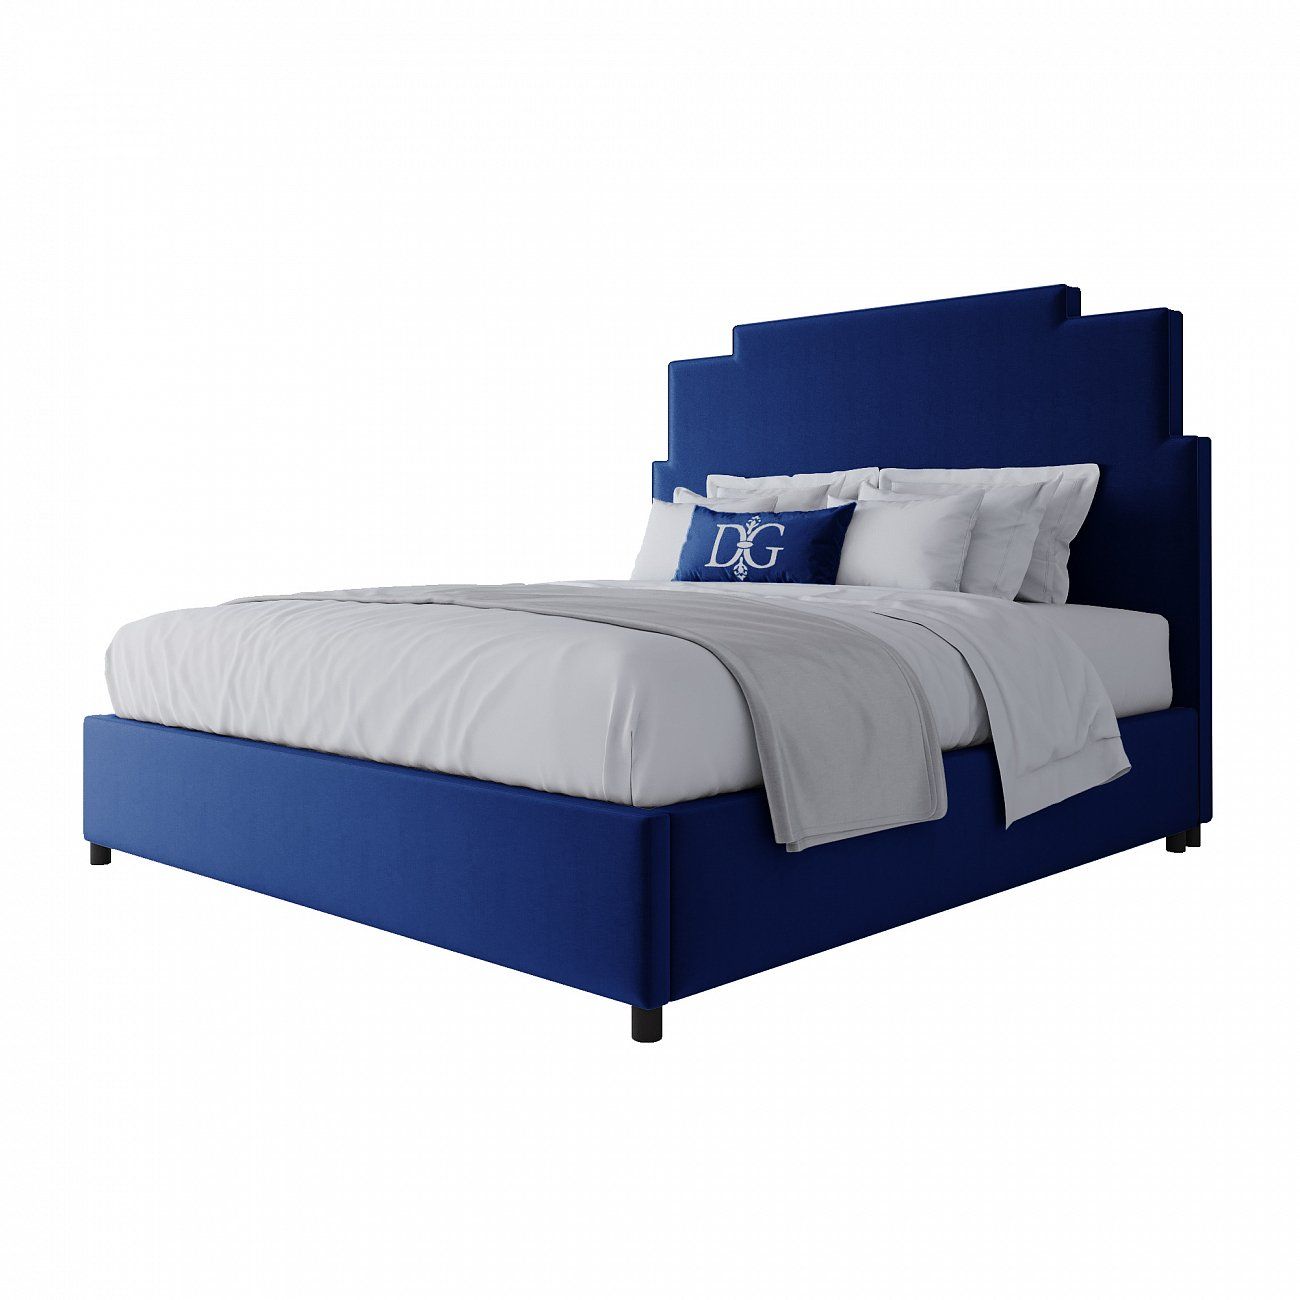 Double Bed 180x200 Blue Paxton Bed Light Blue